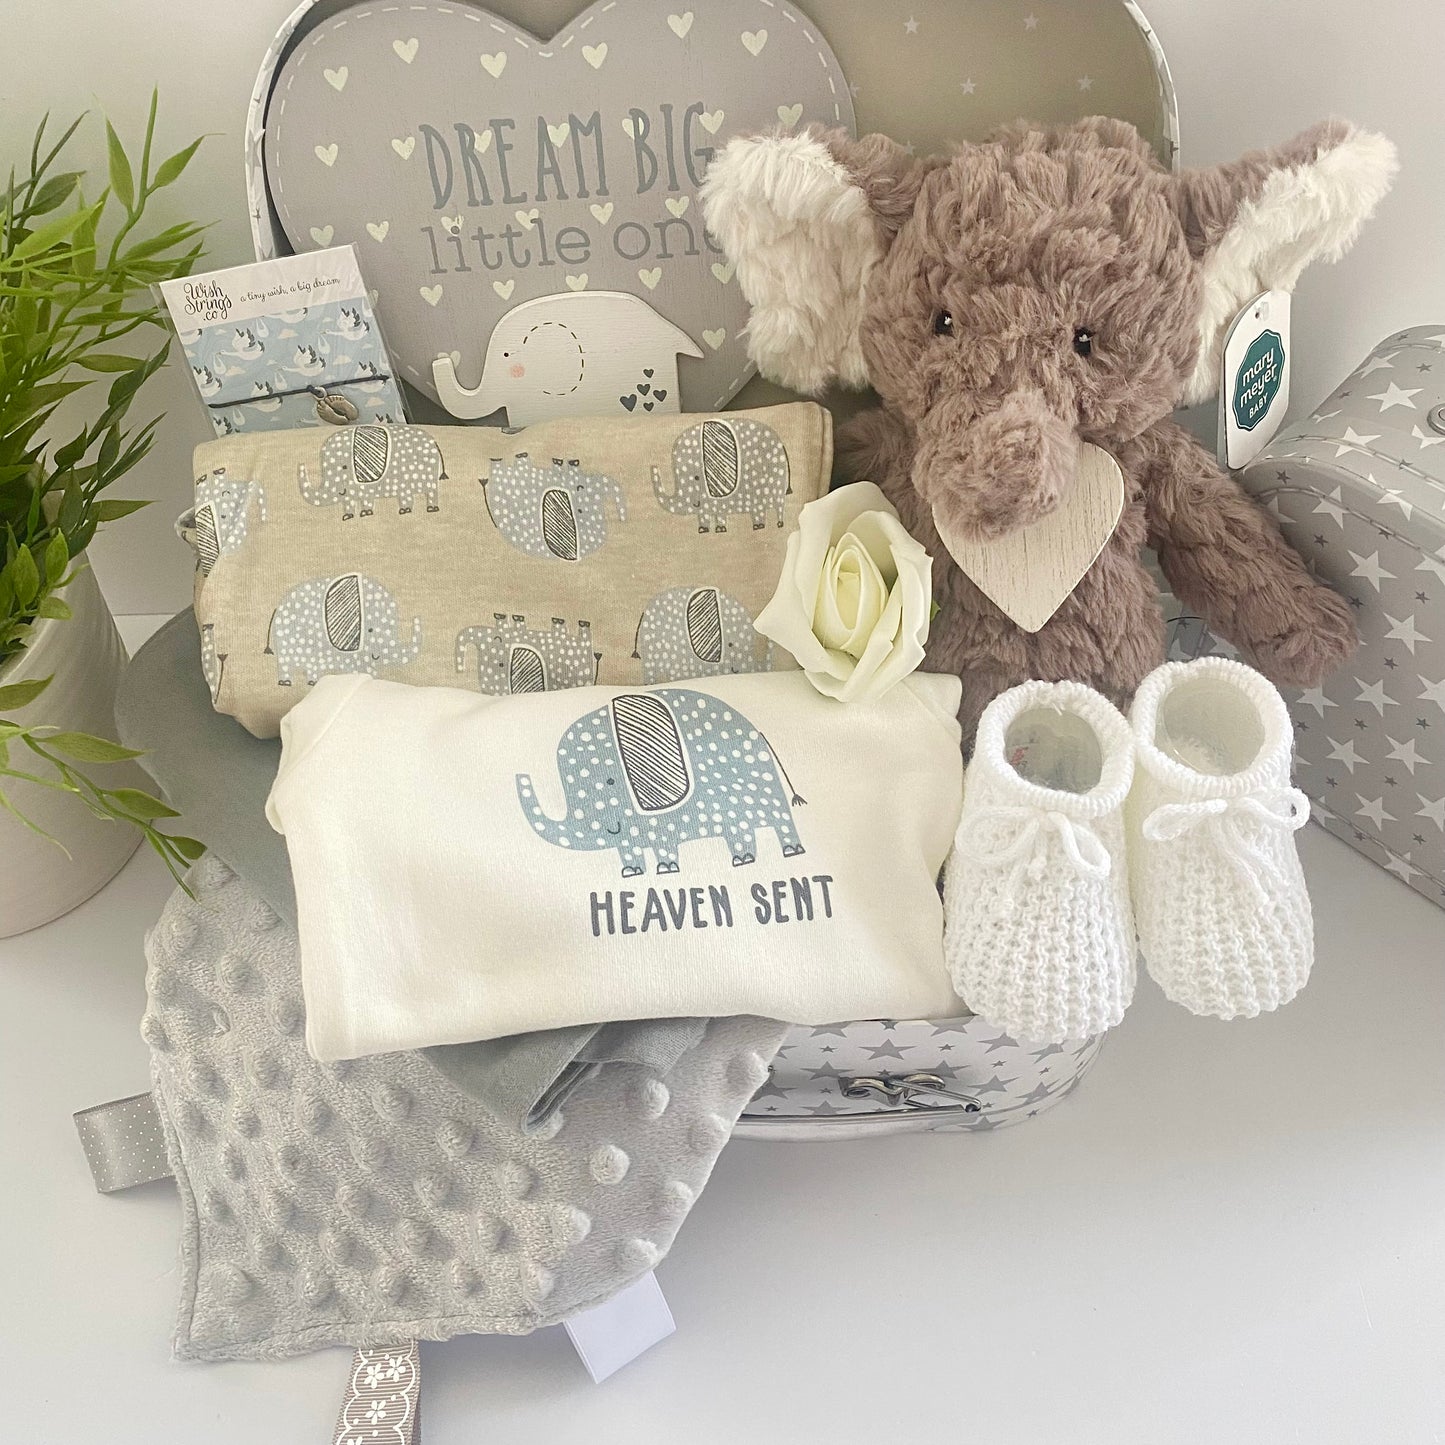 A unisex baby gift hamper in a white and grey stars baby keepsake case containing a Mary Meyer Nursery Putty elephant soft baby toy, a set of 3 coton baby bodysuits with elephant prints and one which reads "Heaven sent", a pair of white baby bootees, a wish braclet for Mum, a heray shaped nursery plaque in grey and white which reads "Dream big little one and has a wooden elephant motif and a grey Taggie blanket.